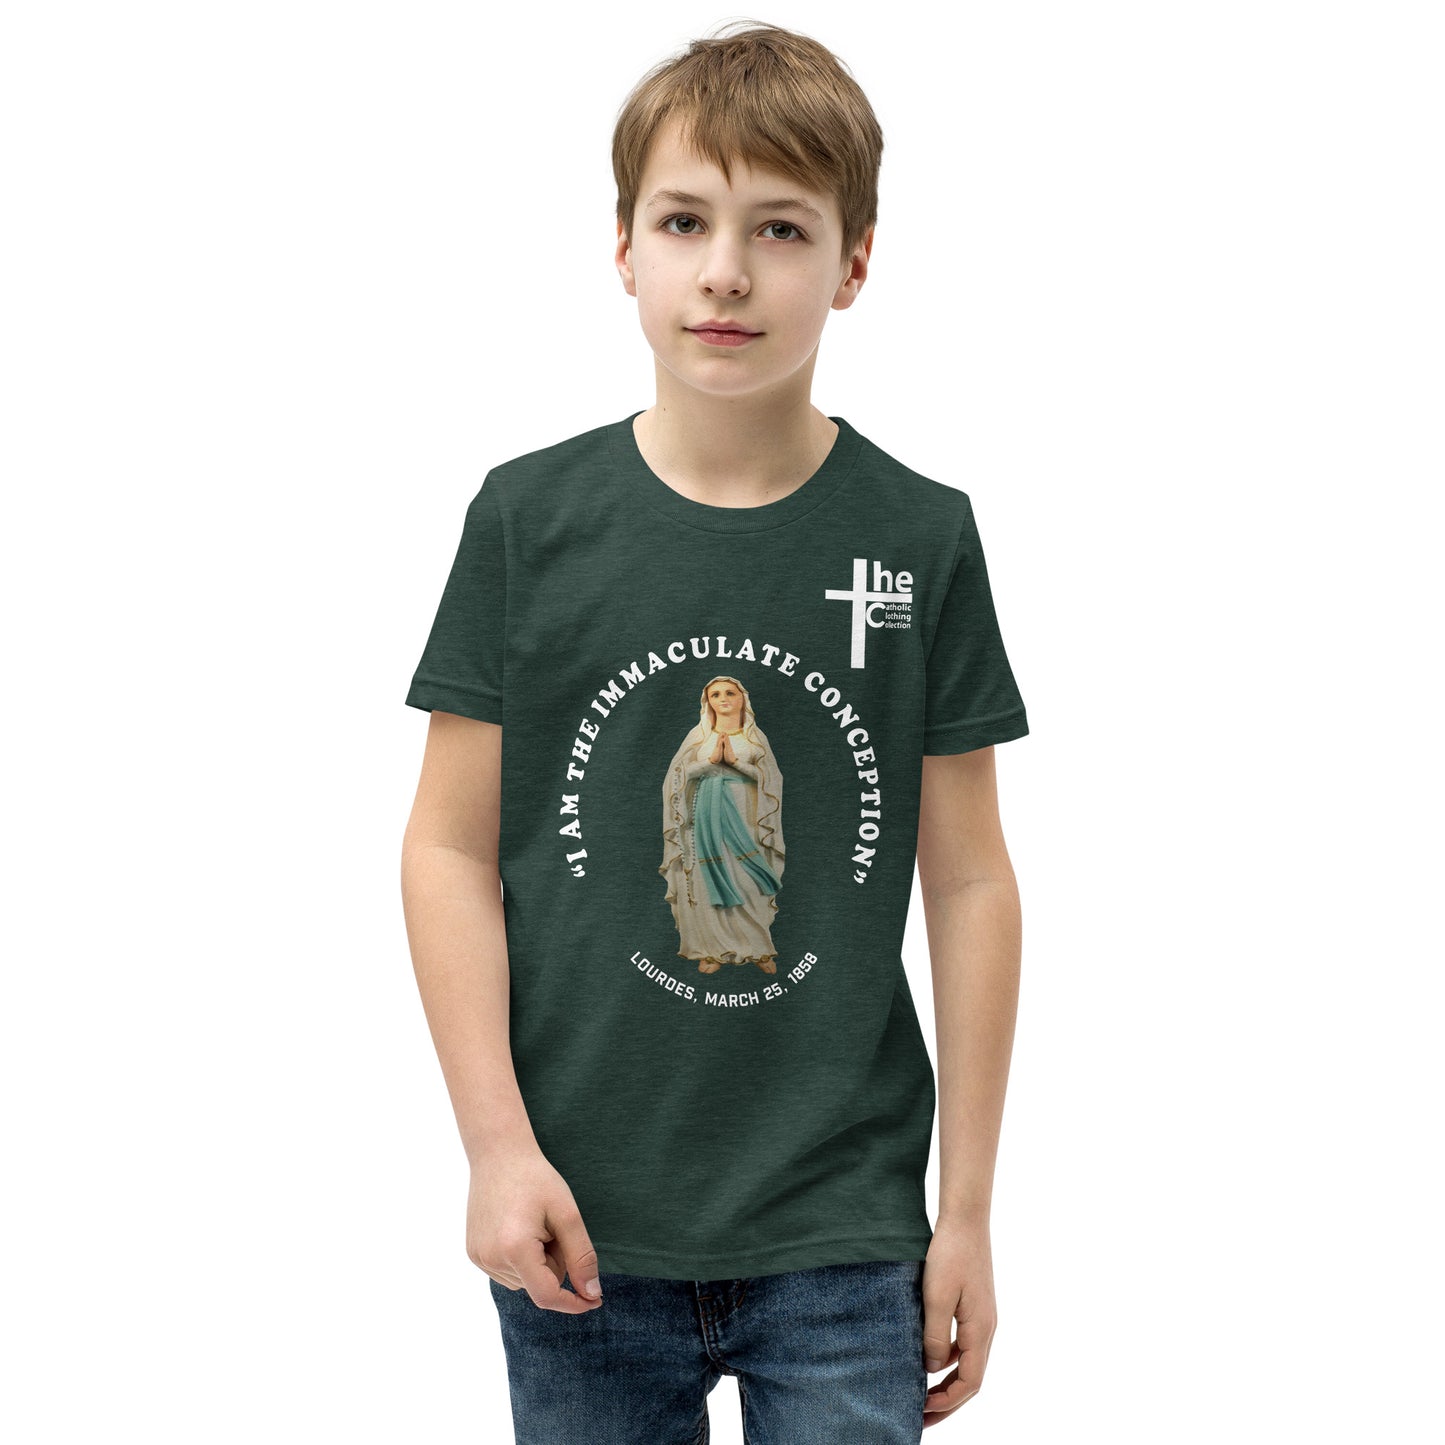 "I Am the Immaculate Conception" - Lourdes, France March 25, 1858 Children's t-Shirt